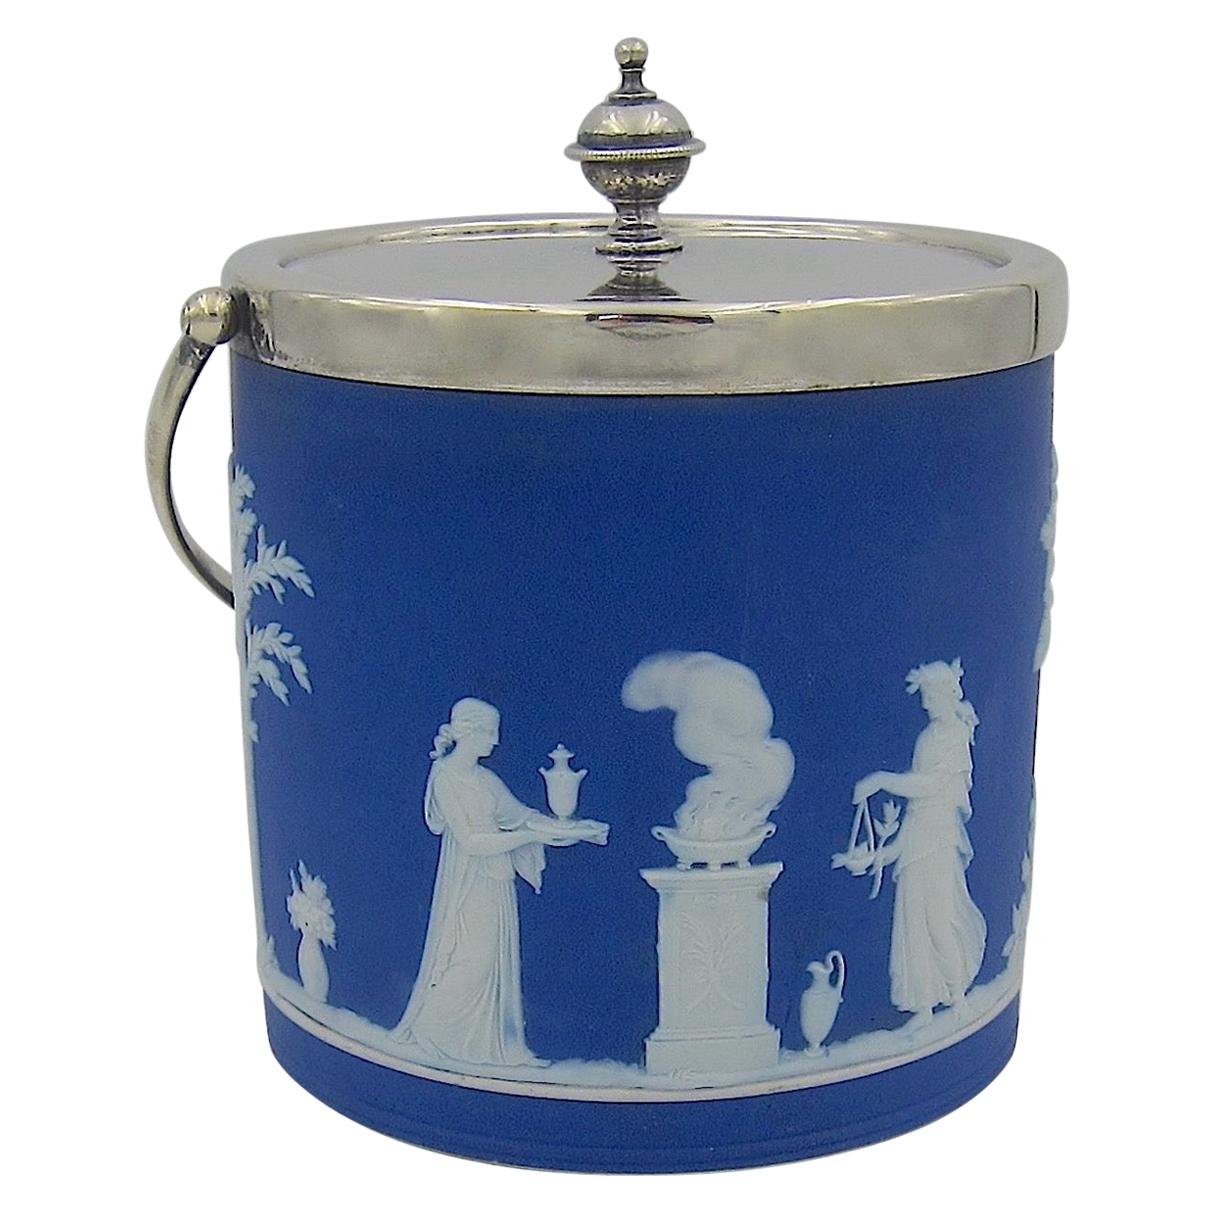 Antique Wedgwood Biscuit Jar in Blue Jasper with Silver-Plated Fittings